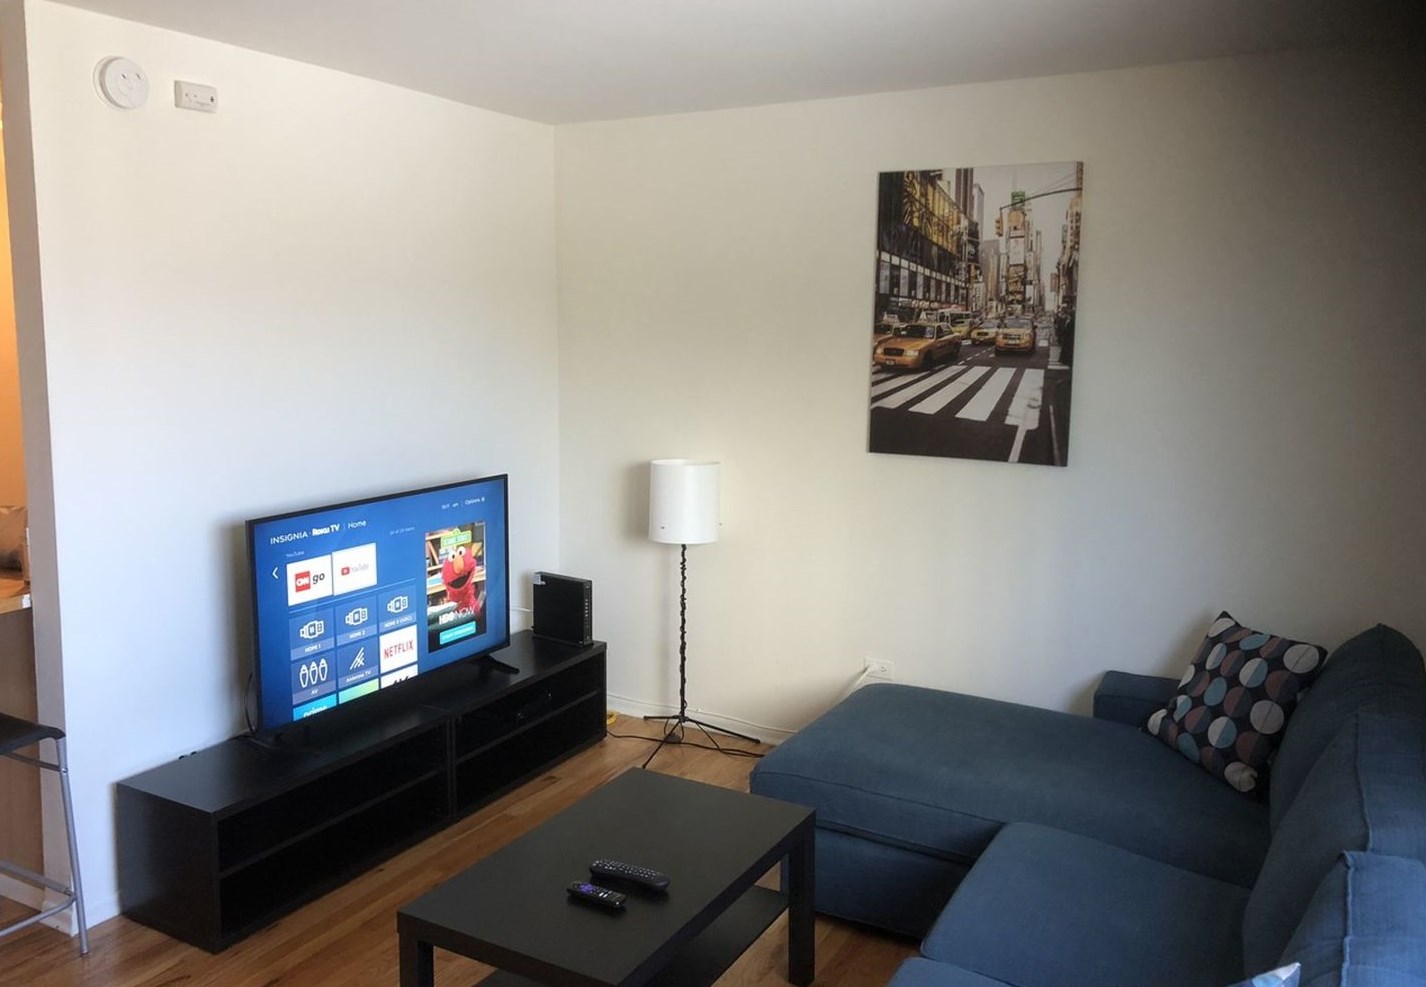 515 W Wrightwood Ave Apt 501, Chicago, IL 60614